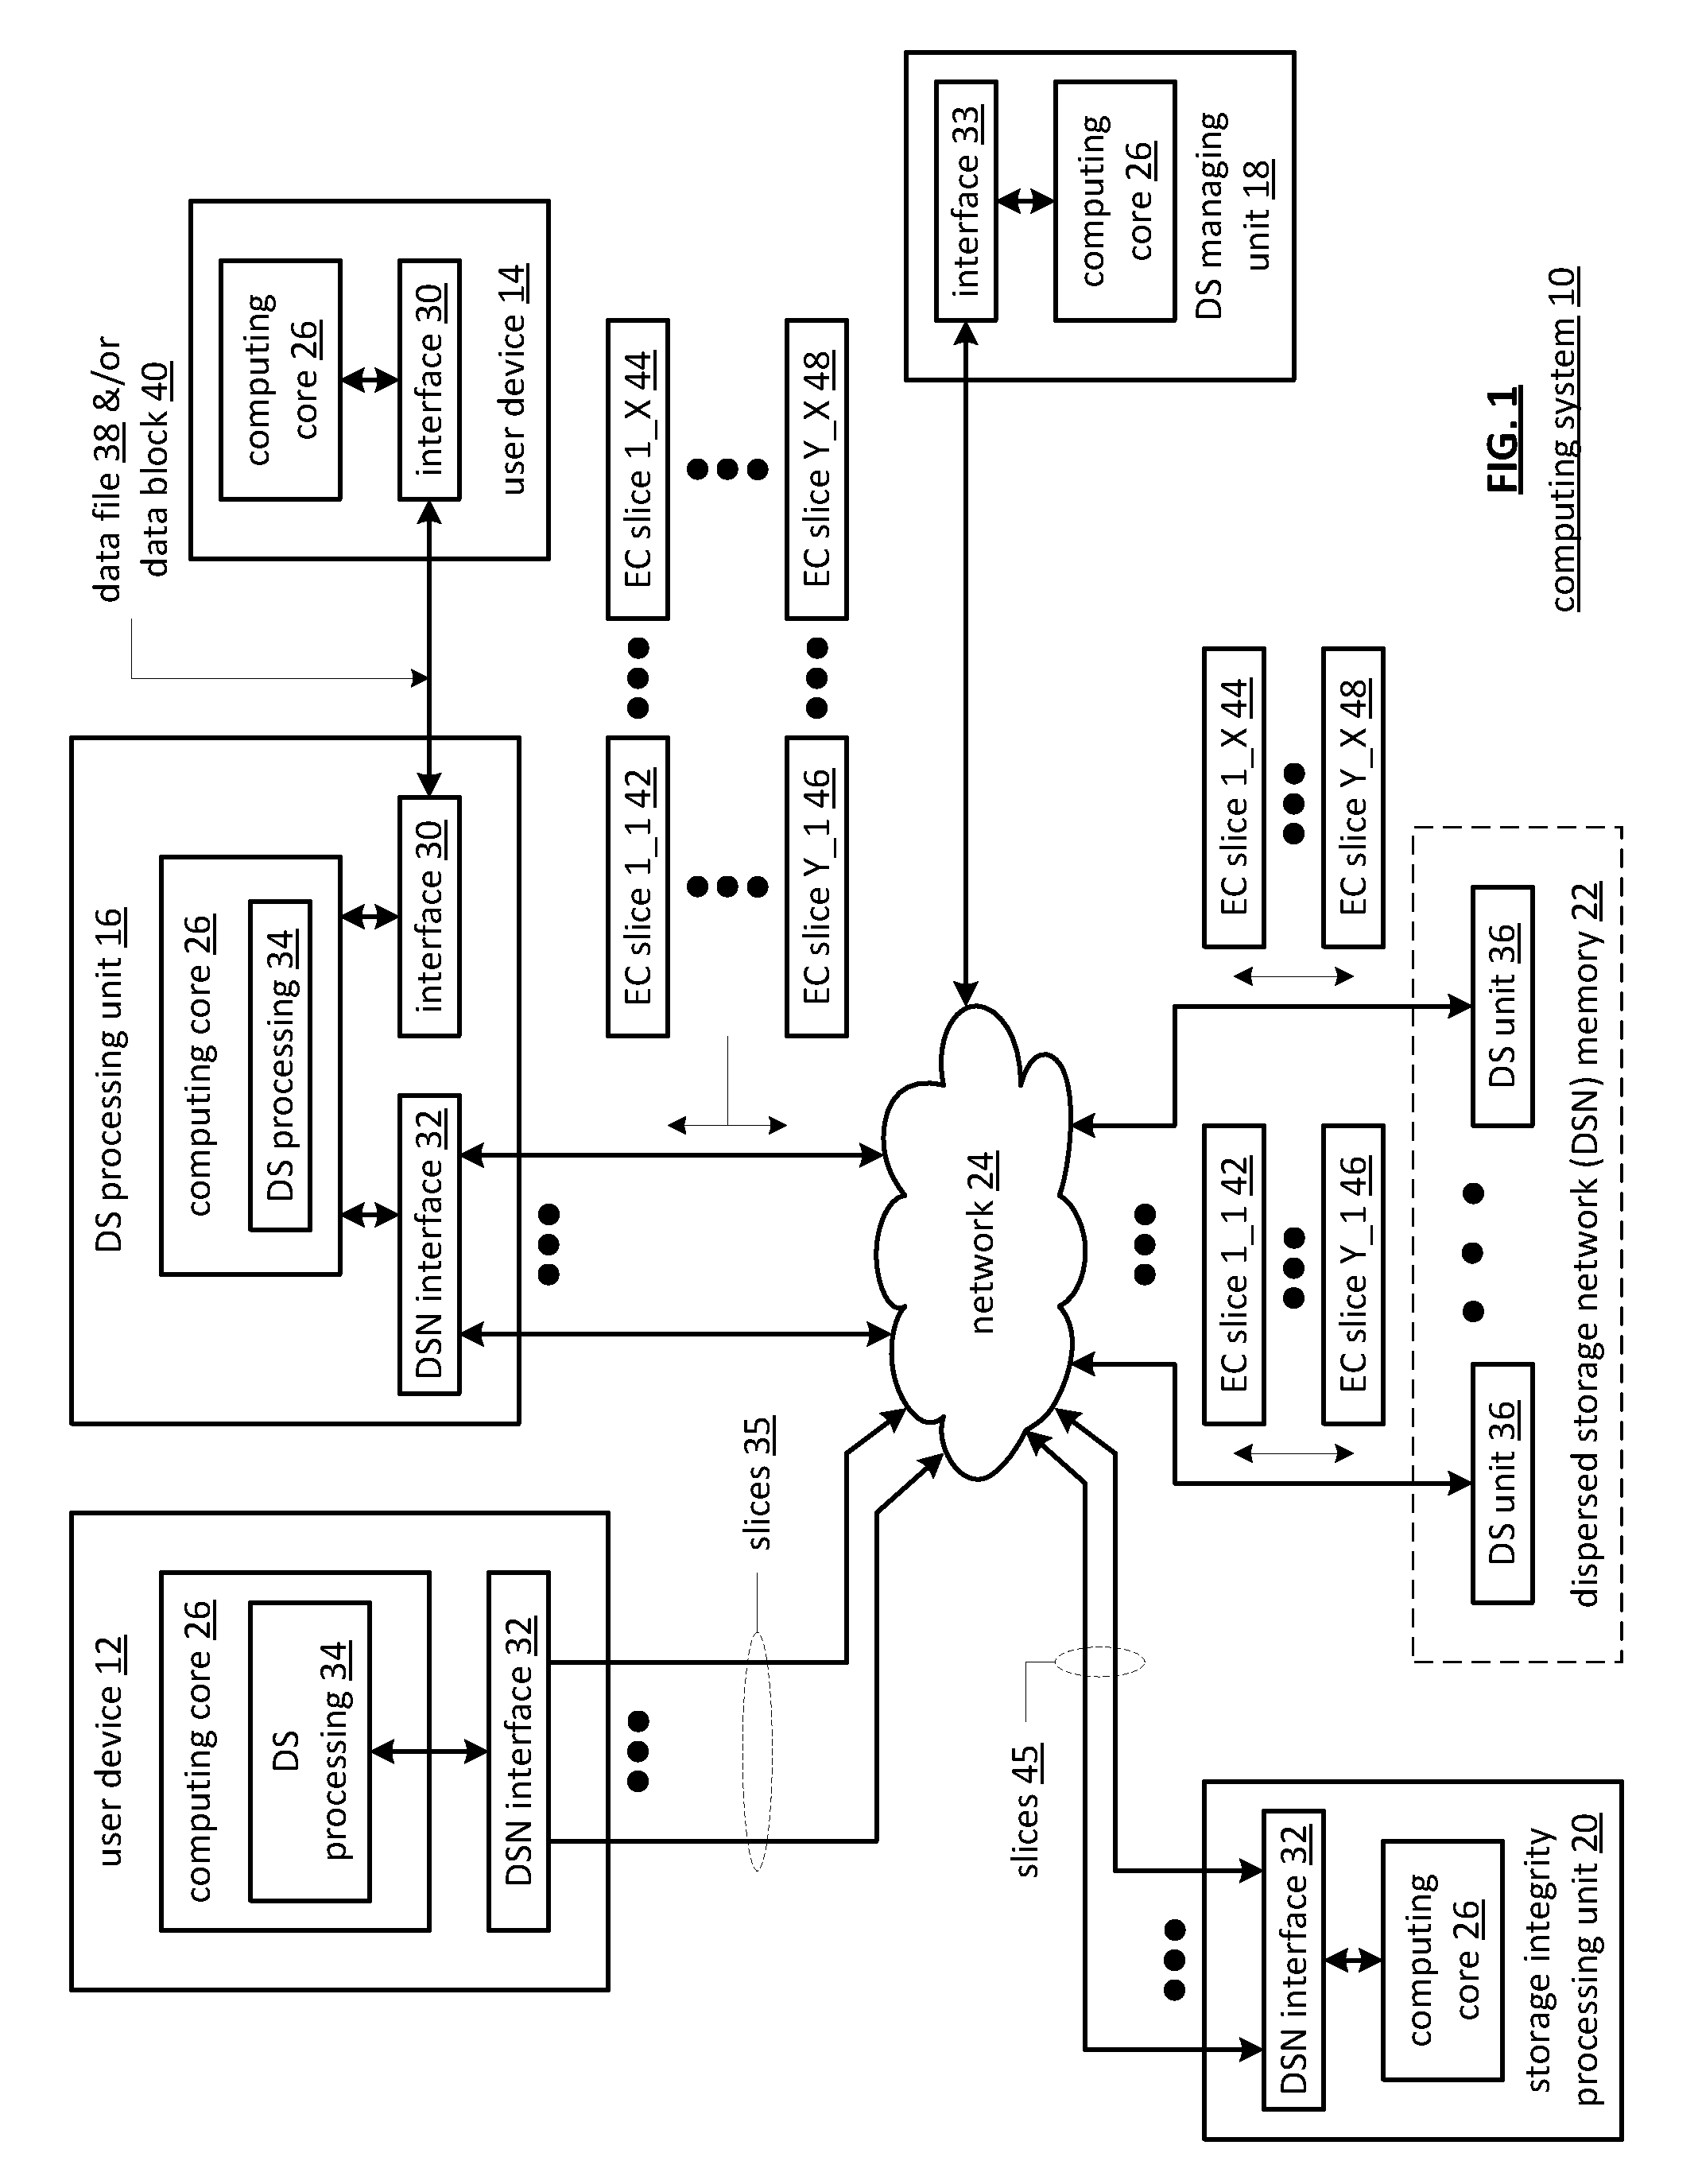 Distributed storage processing module